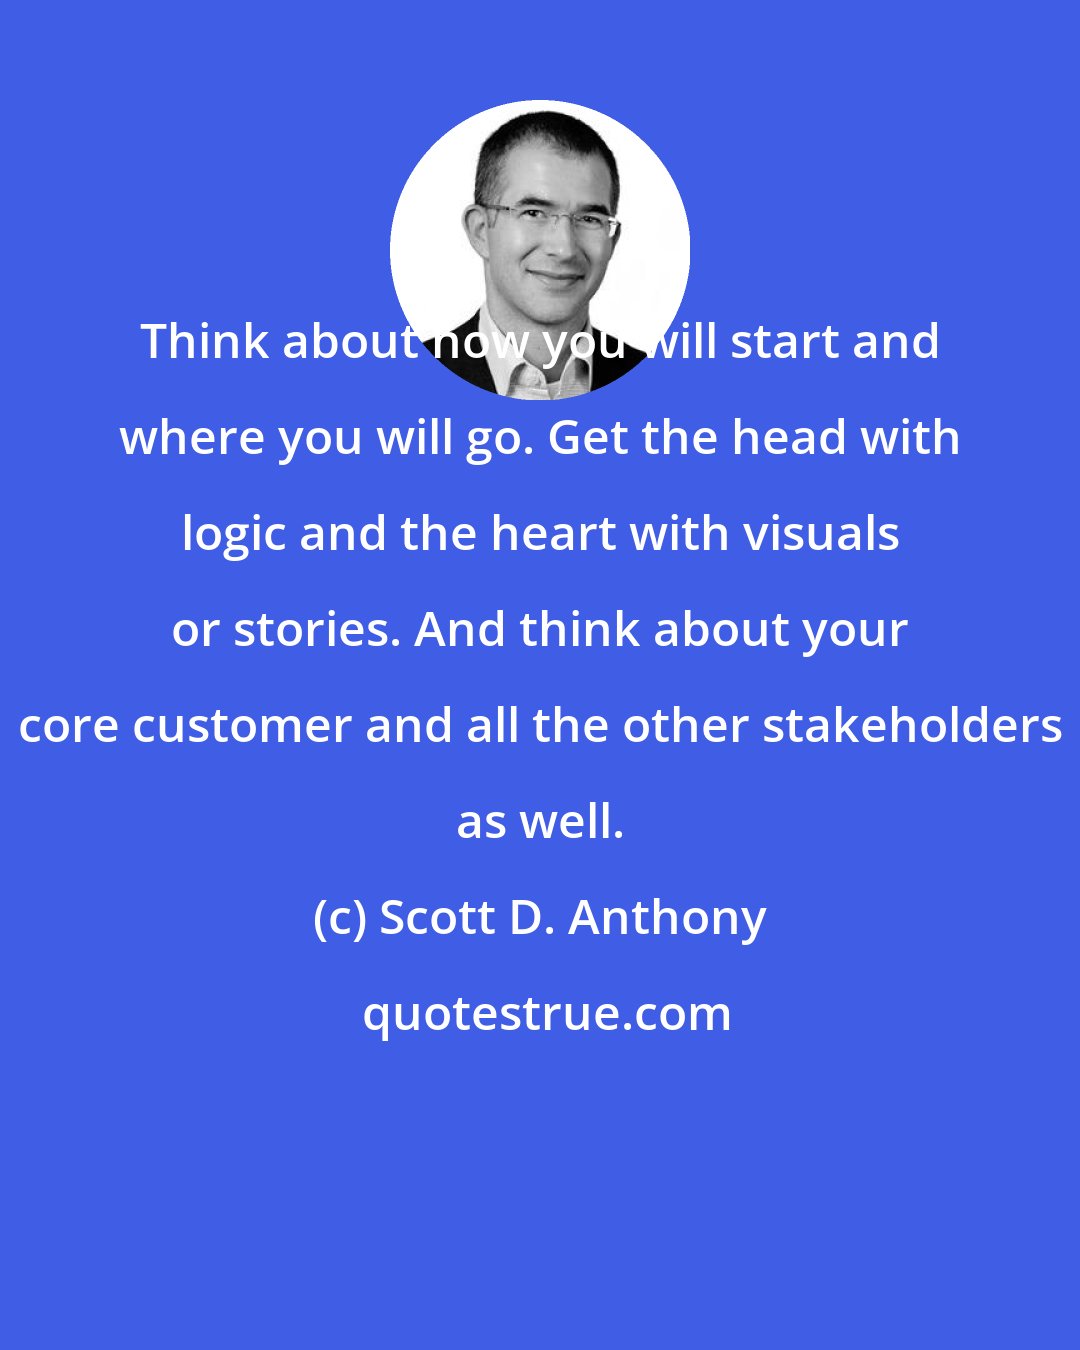 Scott D. Anthony: Think about how you will start and where you will go. Get the head with logic and the heart with visuals or stories. And think about your core customer and all the other stakeholders as well.